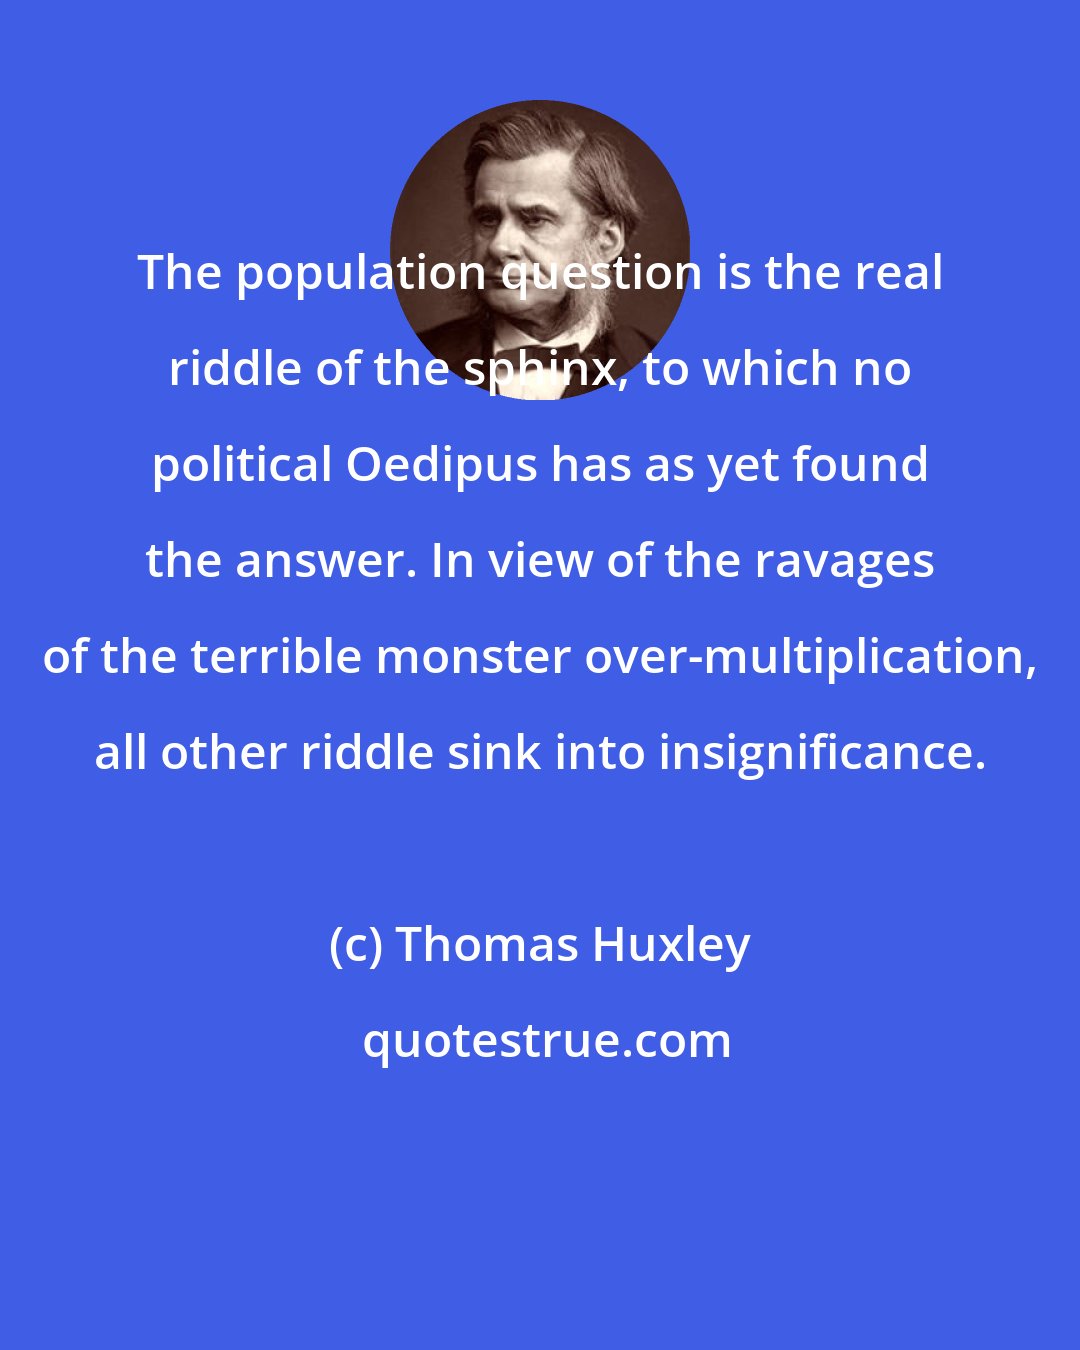 Thomas Huxley: The population question is the real riddle of the sphinx, to which no political Oedipus has as yet found the answer. In view of the ravages of the terrible monster over-multiplication, all other riddle sink into insignificance.